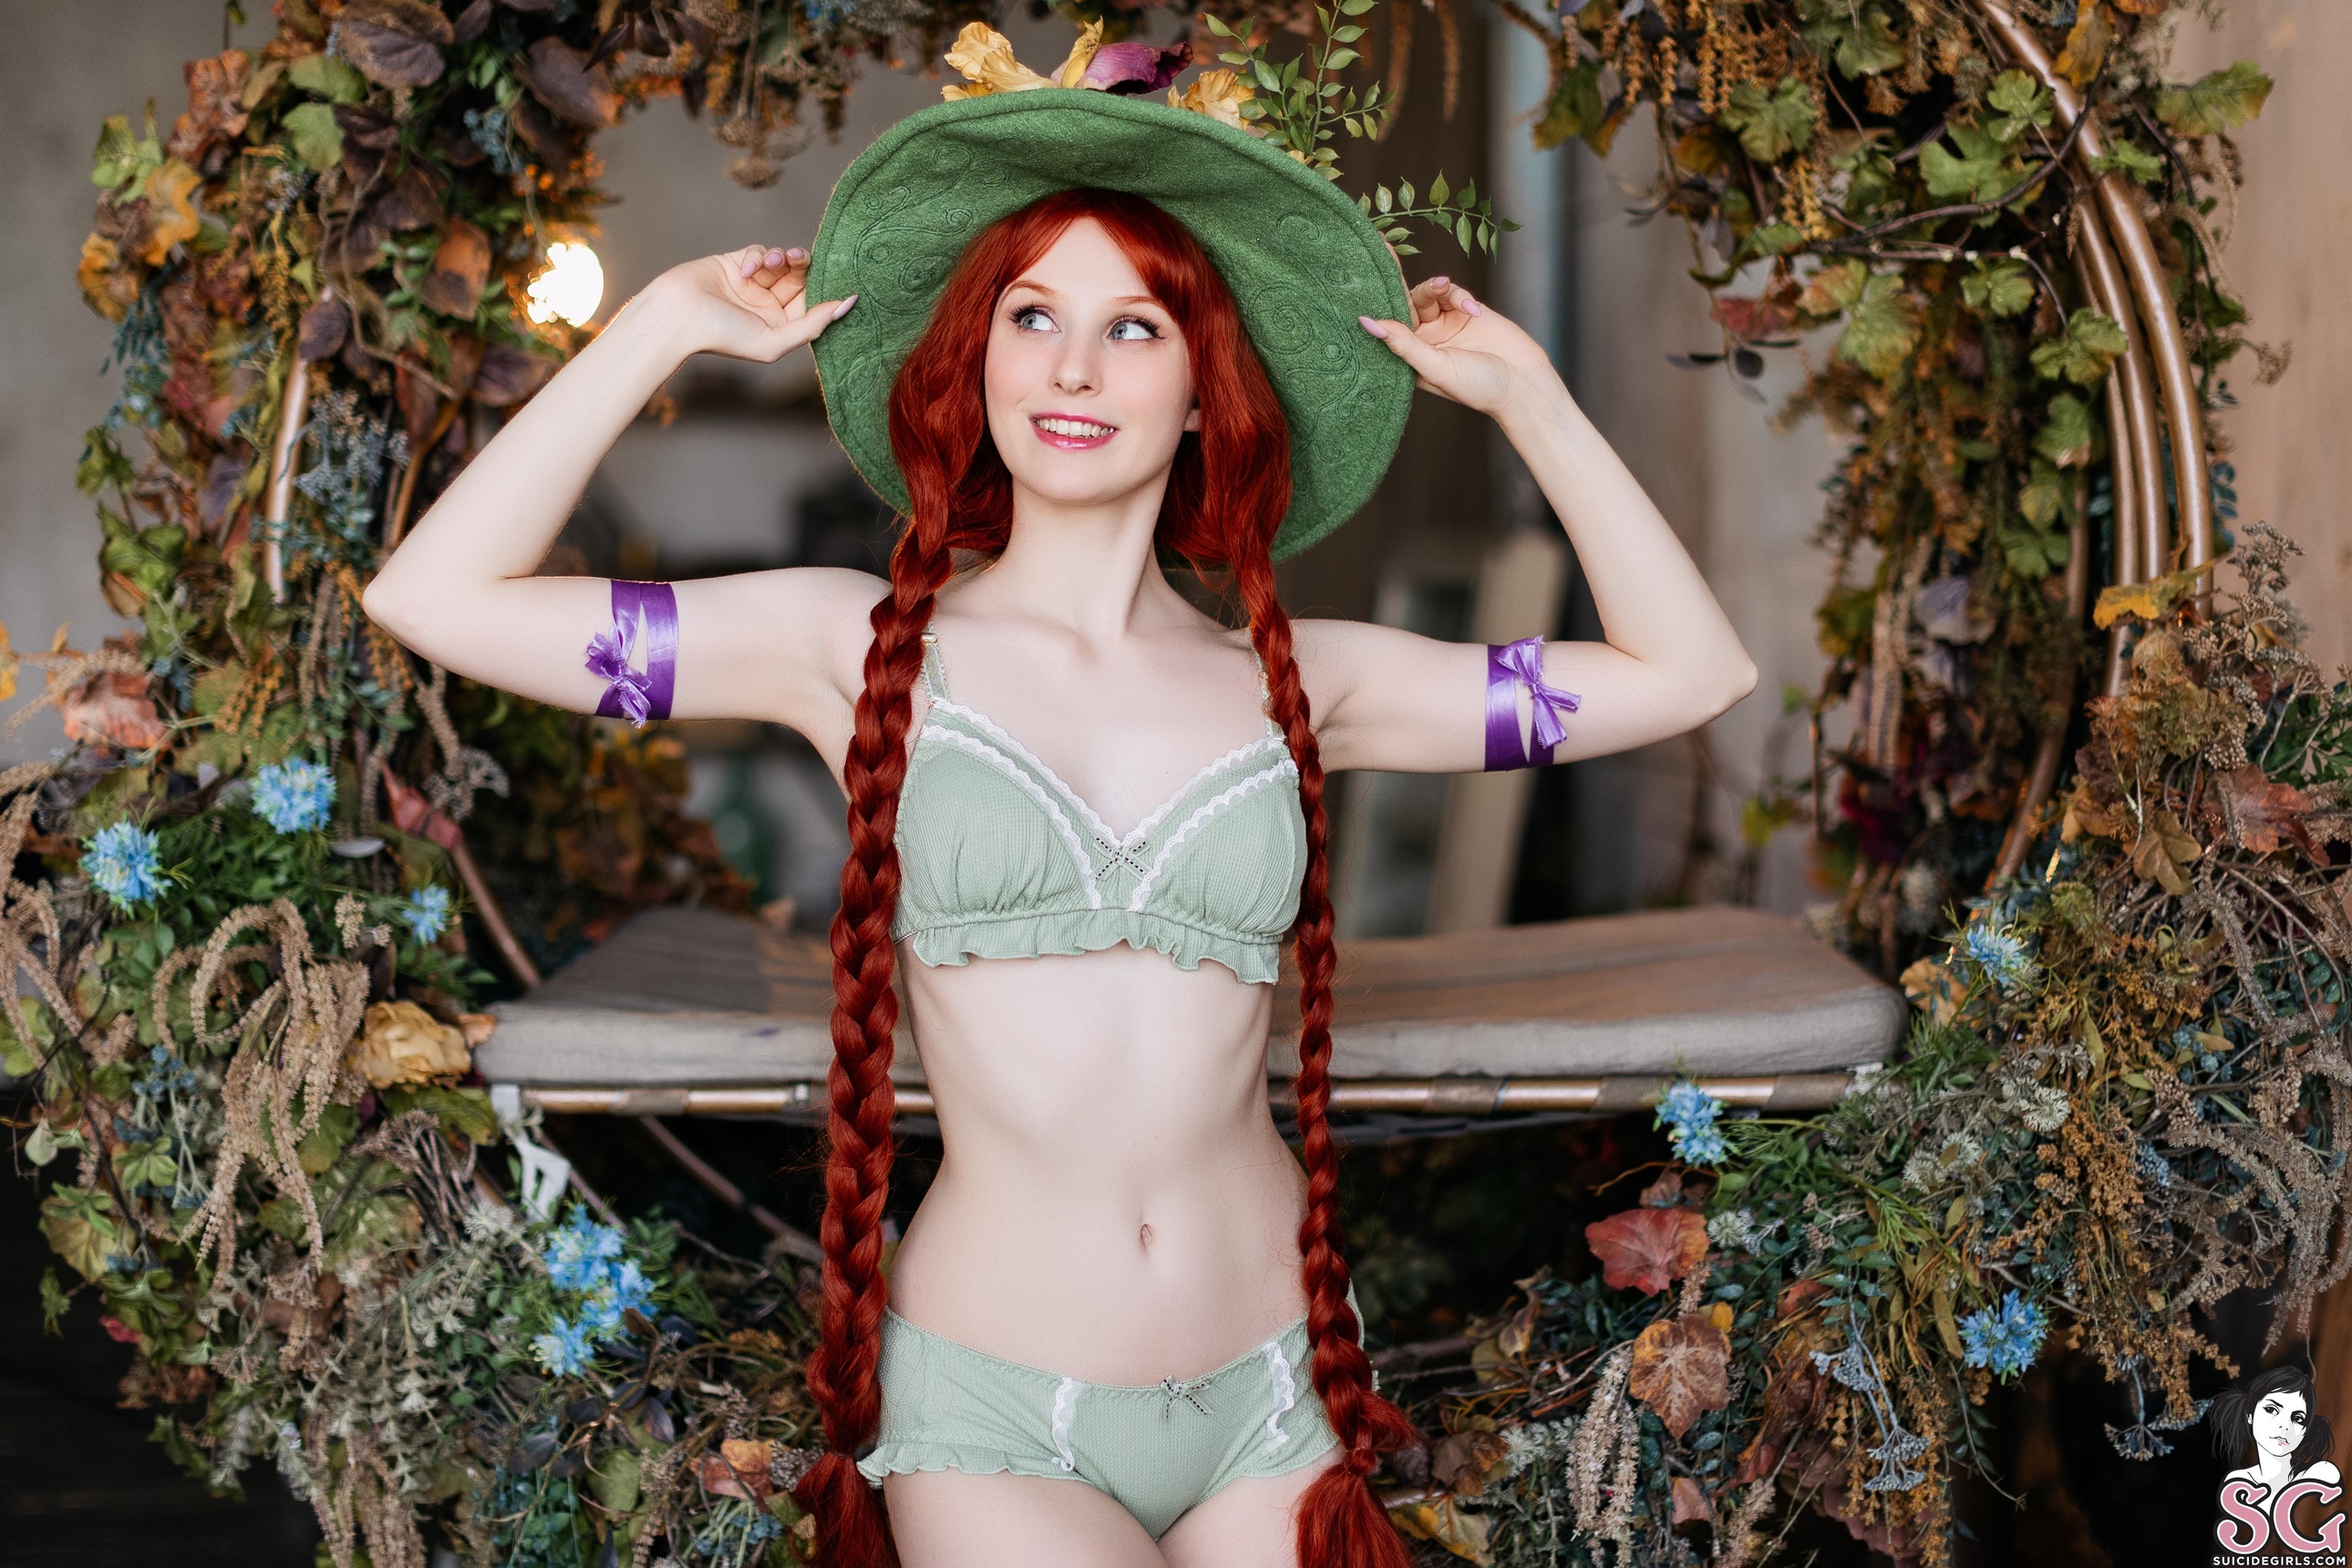 People 2580x1720 Marie McMuller Burlesque Suicide Girls redhead women model braids lingerie armpits long hair bokeh looking away smiling women with hats green lingerie purple ribbon twintails Mirabel Garlick